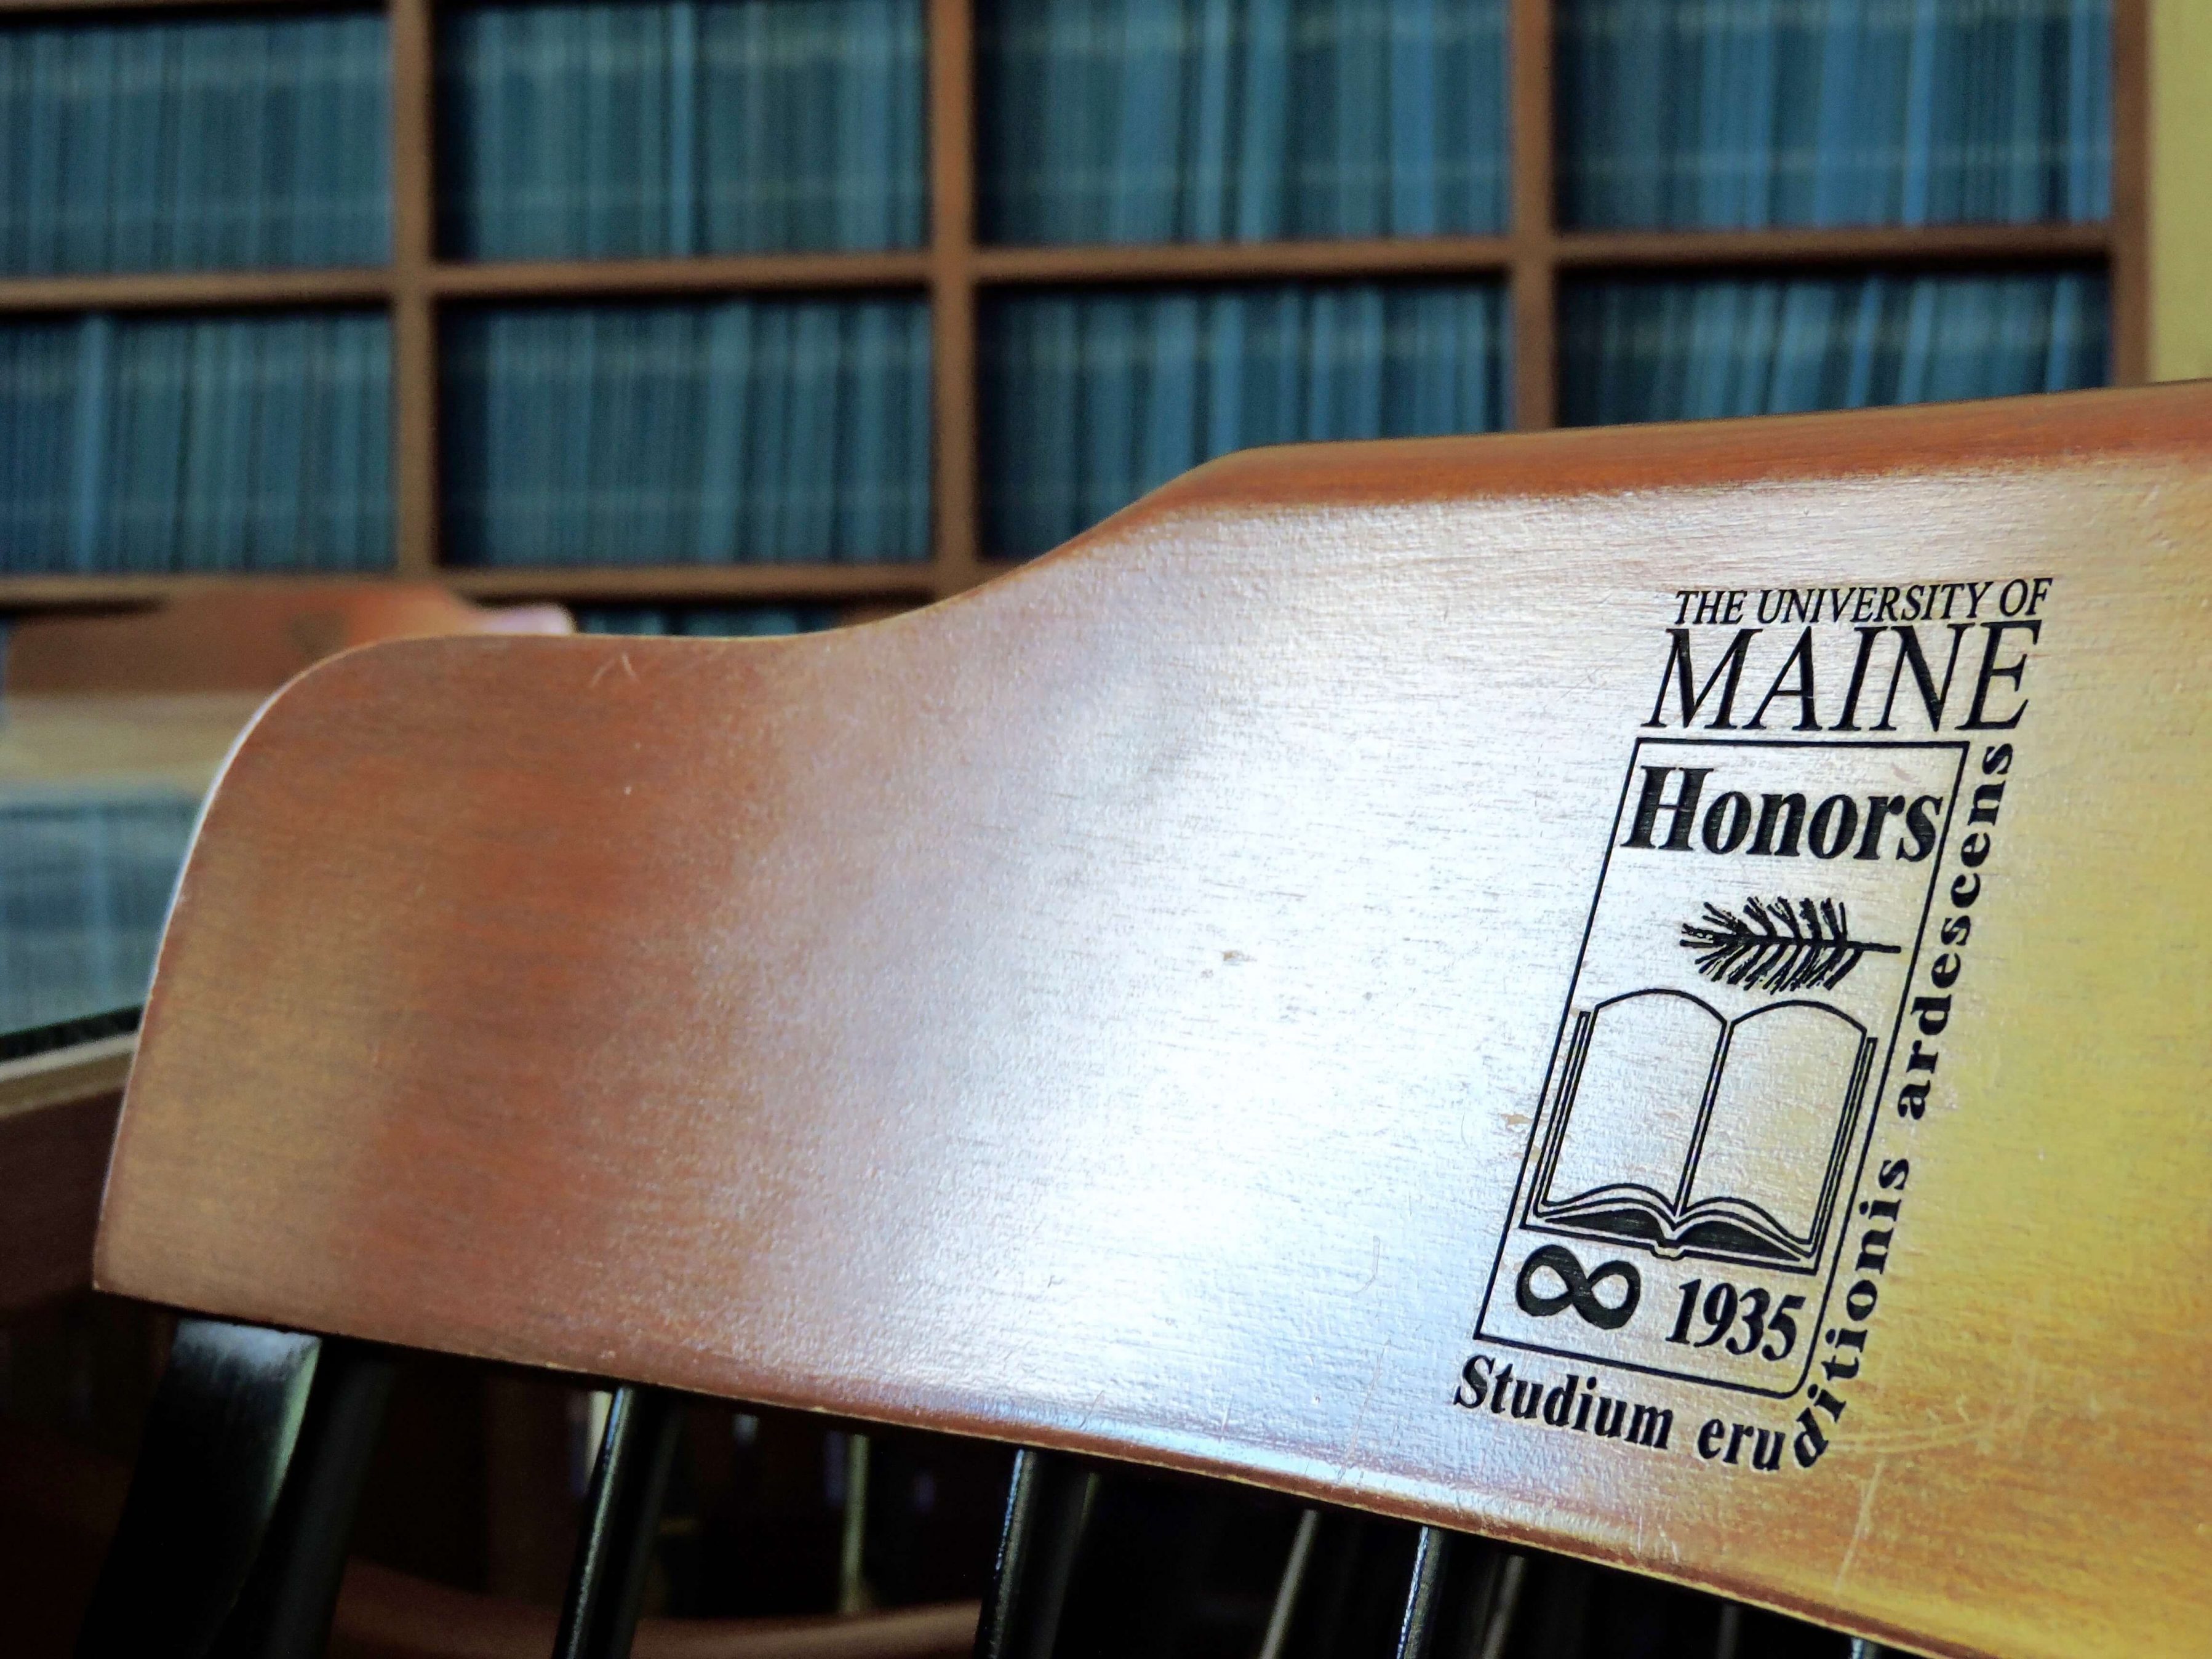 Honors chair in the thesis reading room, with bookshelves of theses shown behind it.